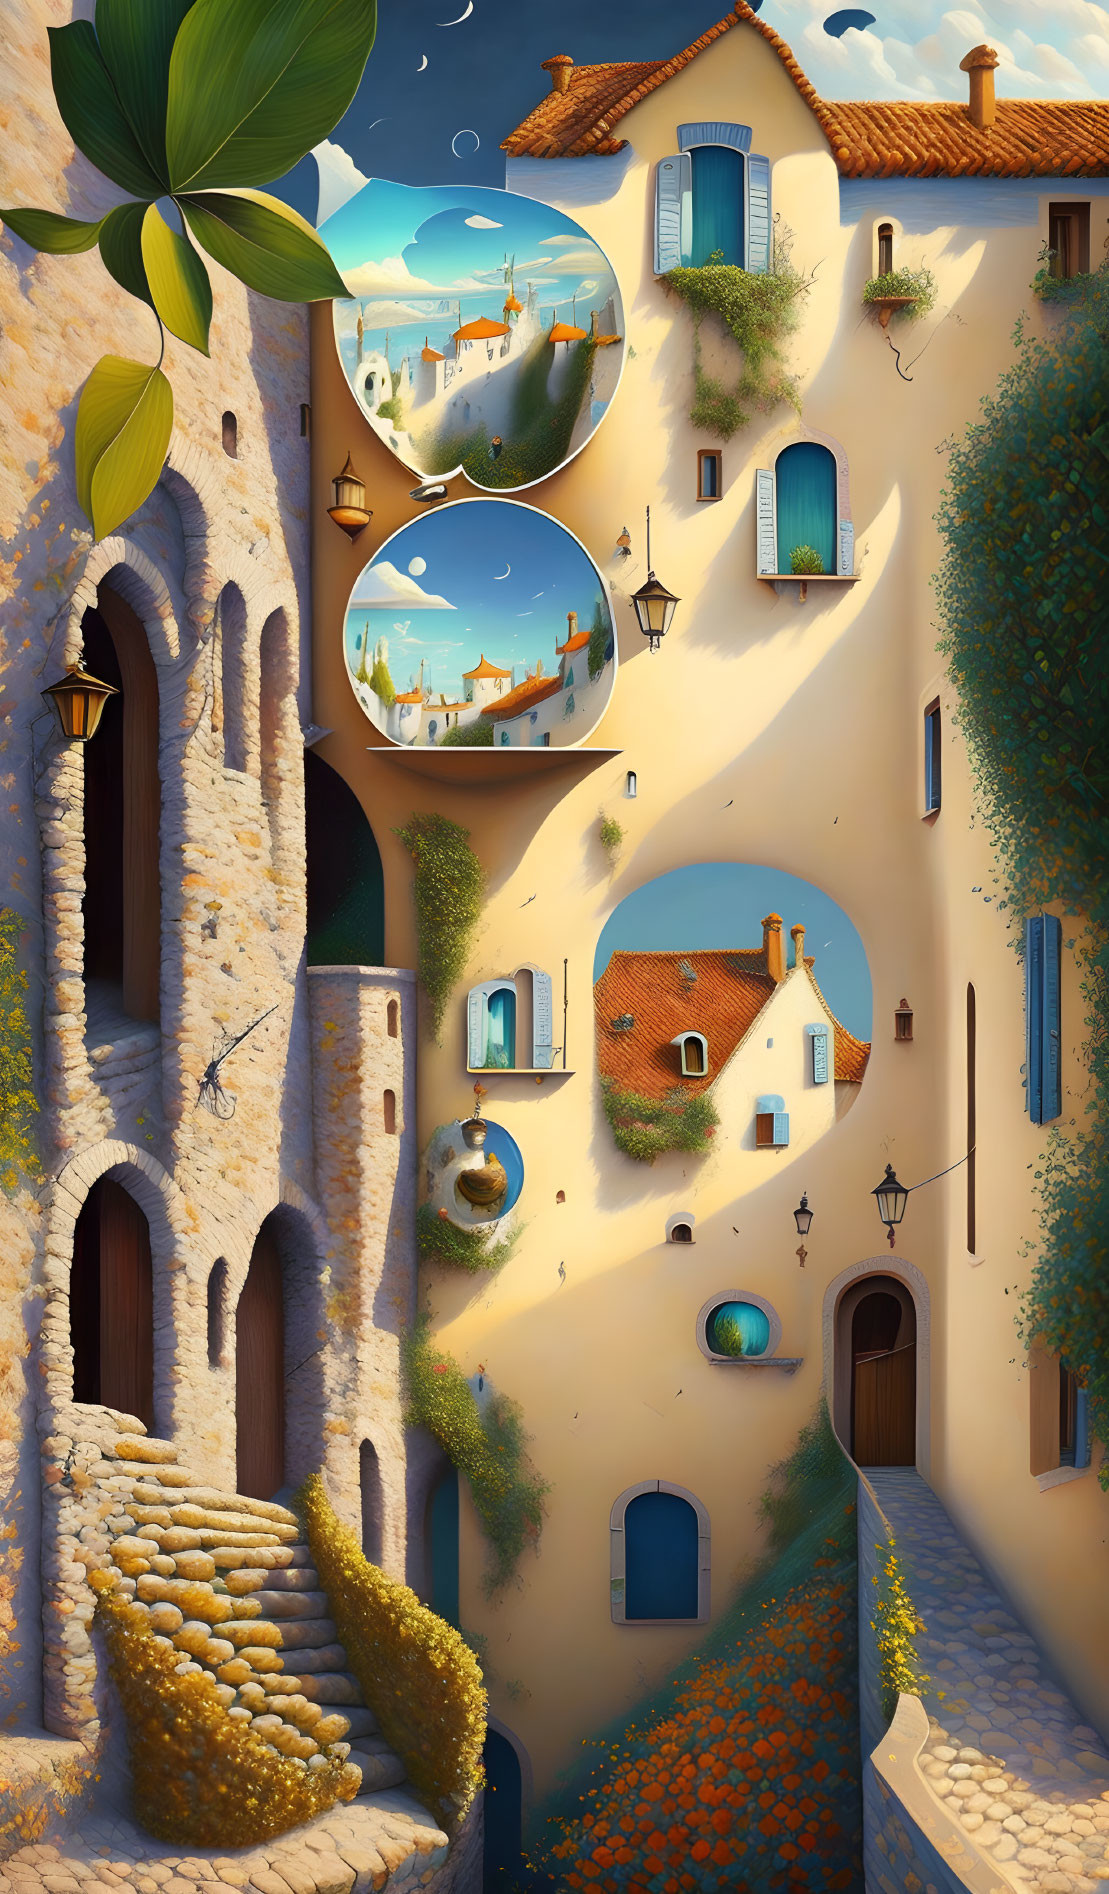 Surreal village with flowing architecture and upside-down elements